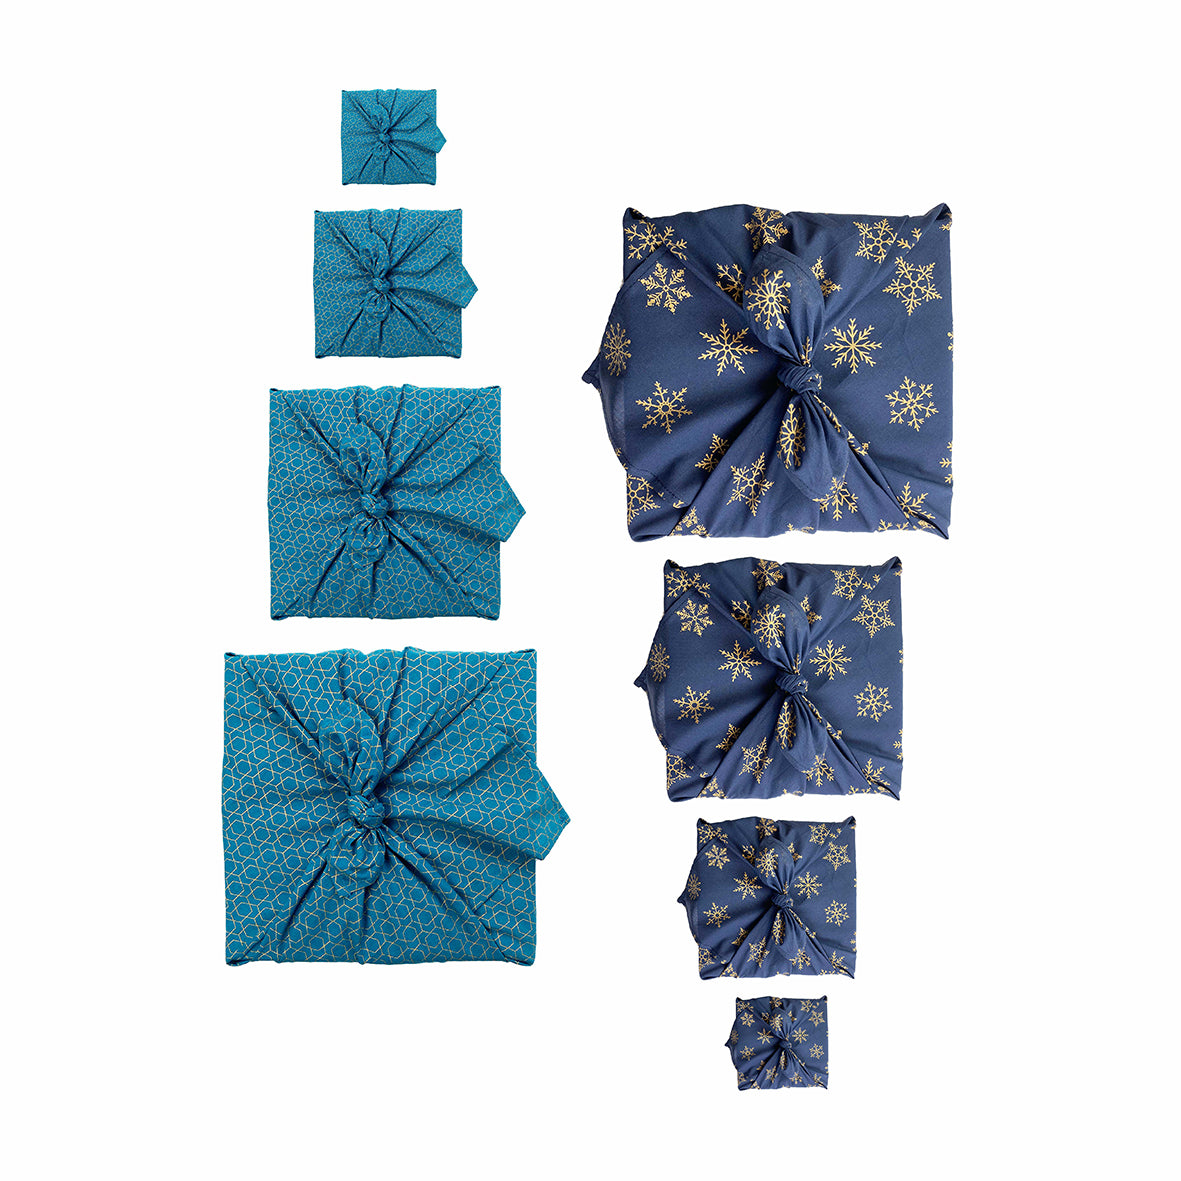 Contemporary Christmas - Ocean and Snowflakes 8 piece set